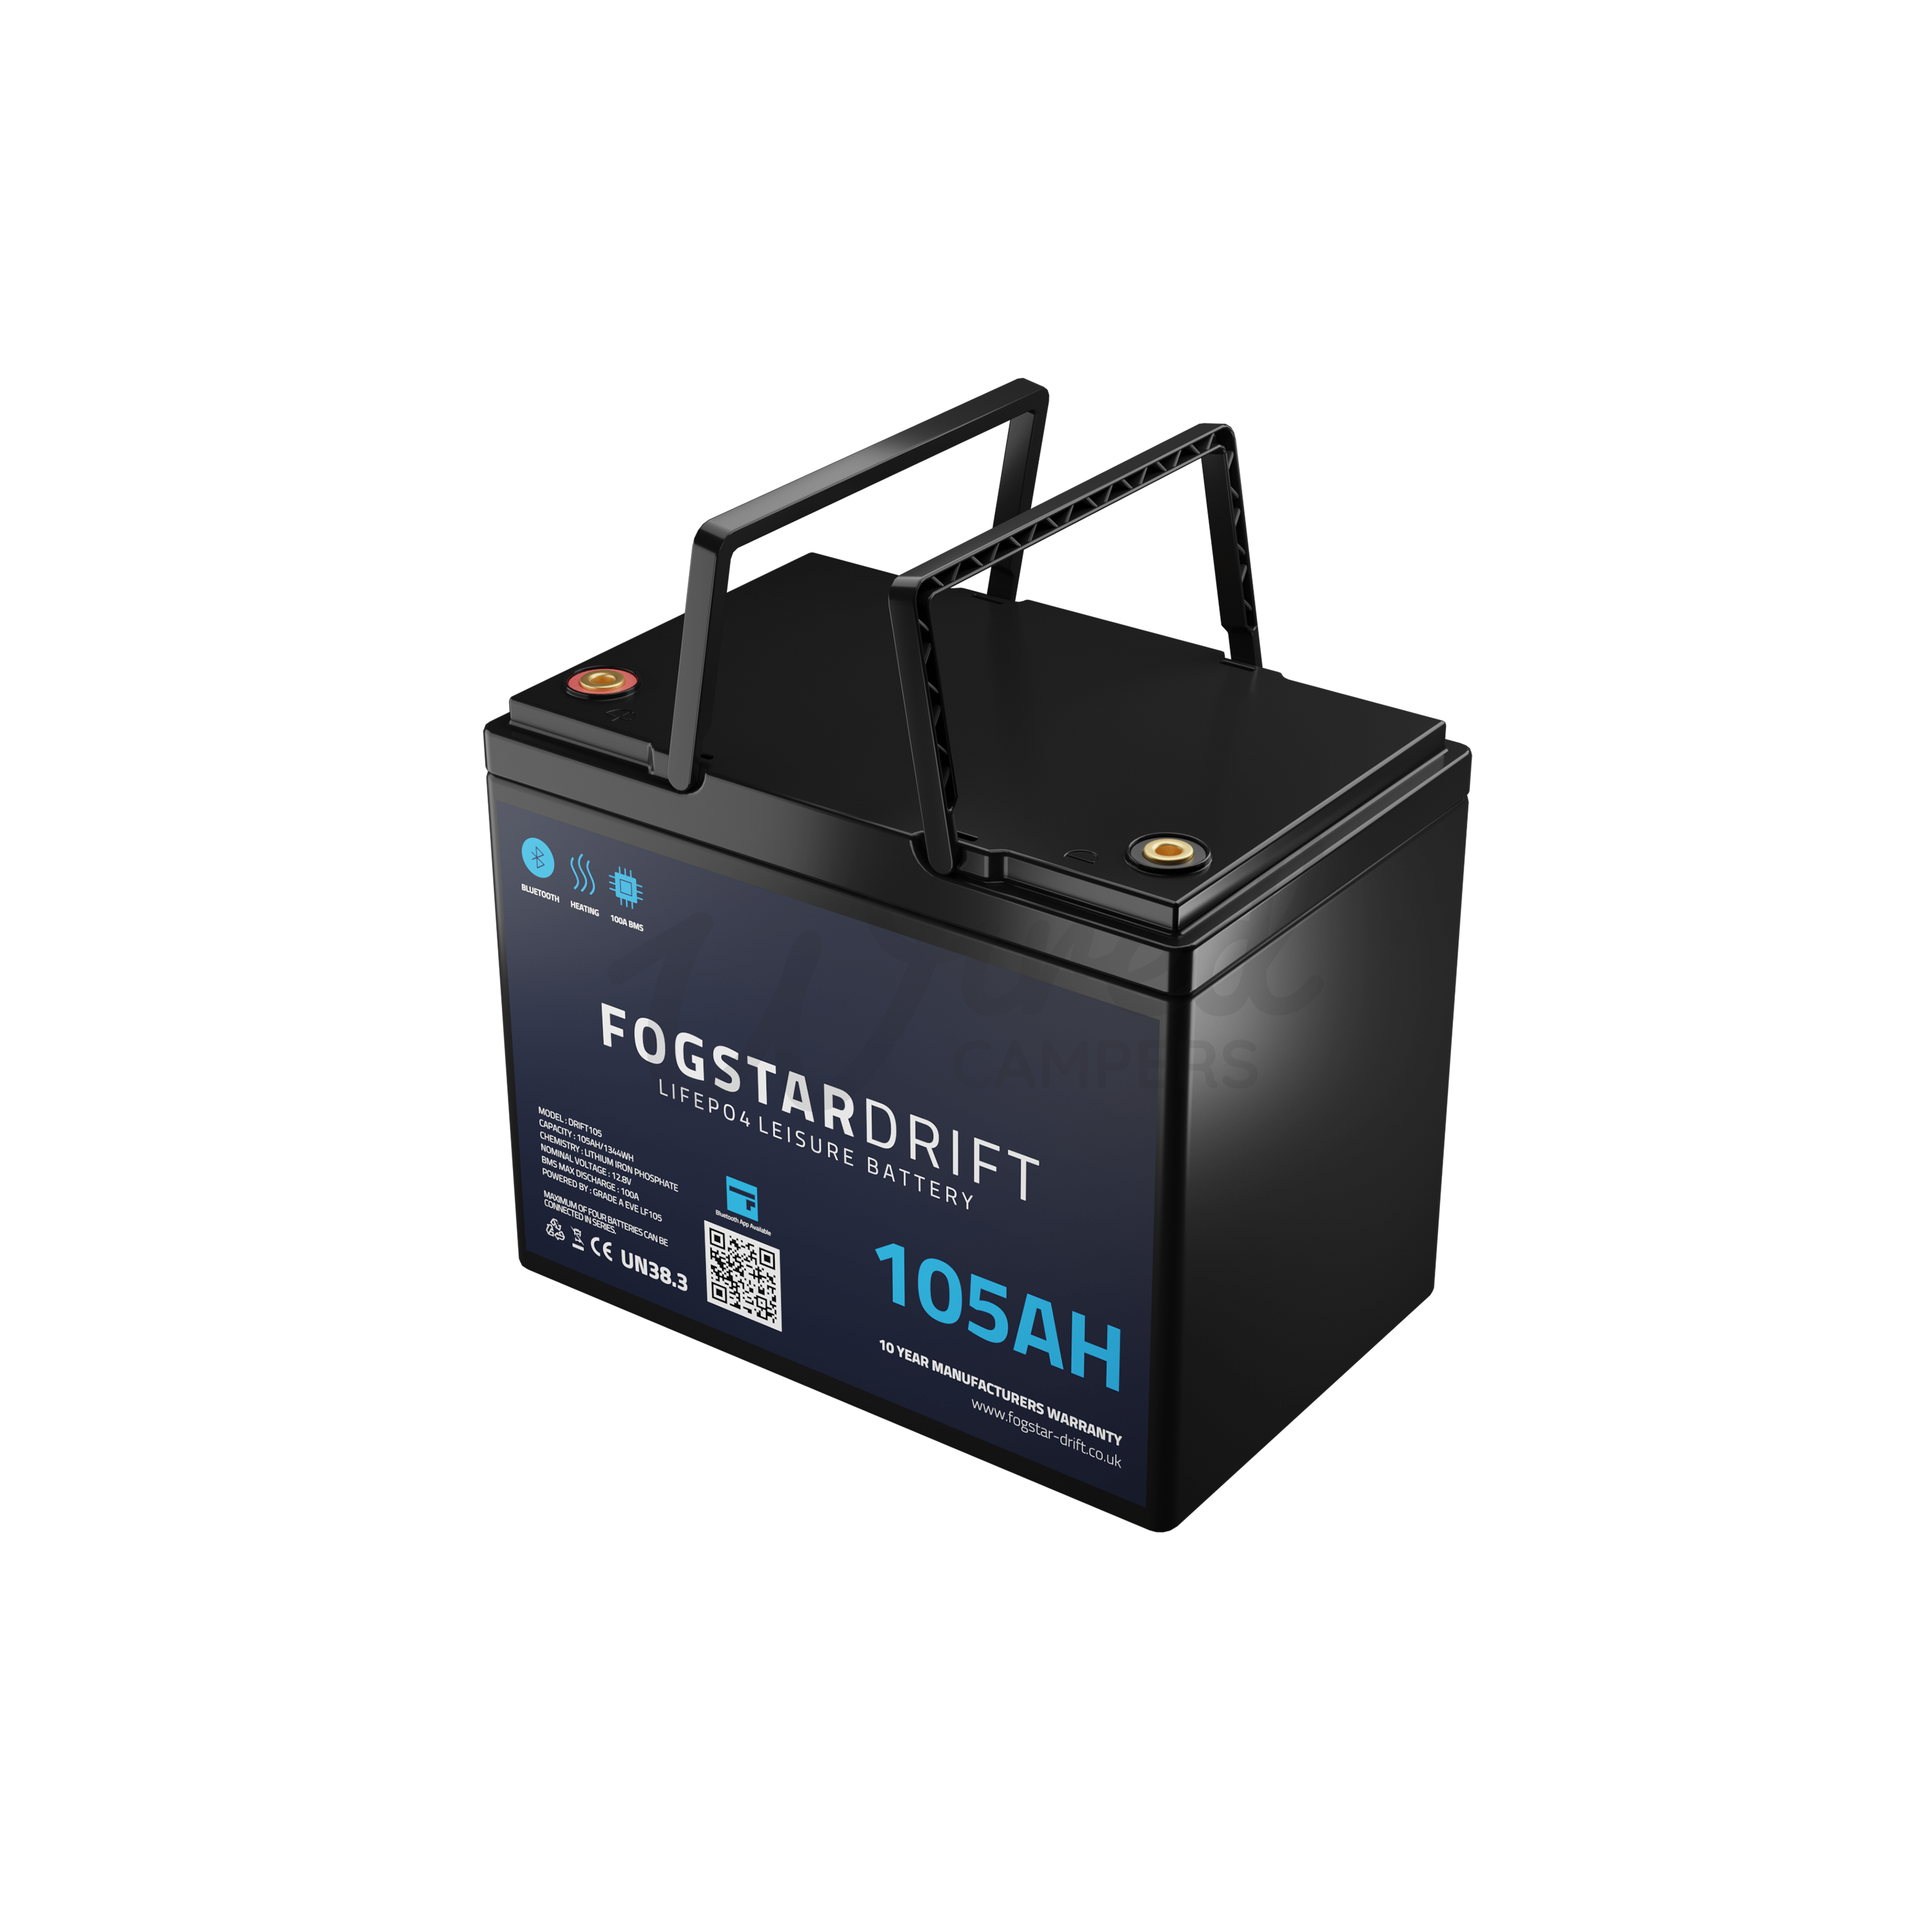 Wired Campers Limited Fogstar Drift 12V 105AH Heated Lithium LiFePO4 Leisure Battery